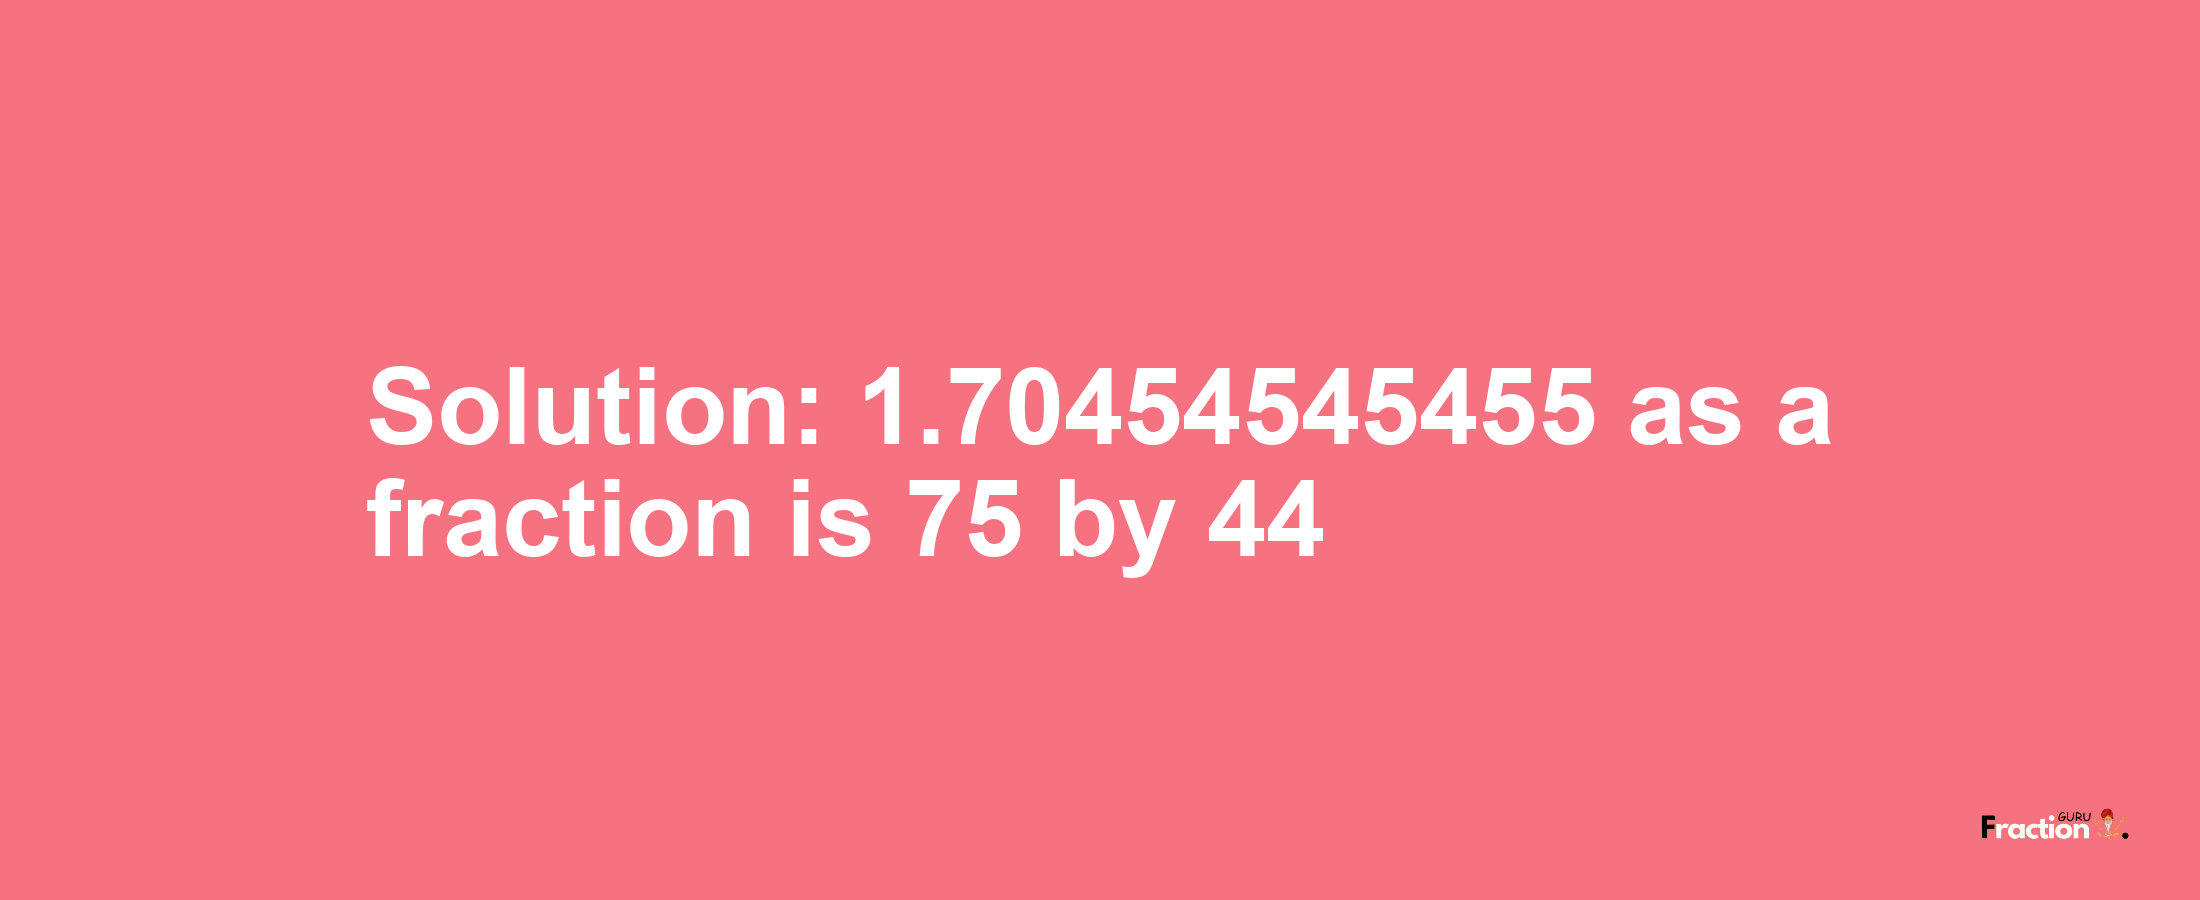 Solution:1.70454545455 as a fraction is 75/44